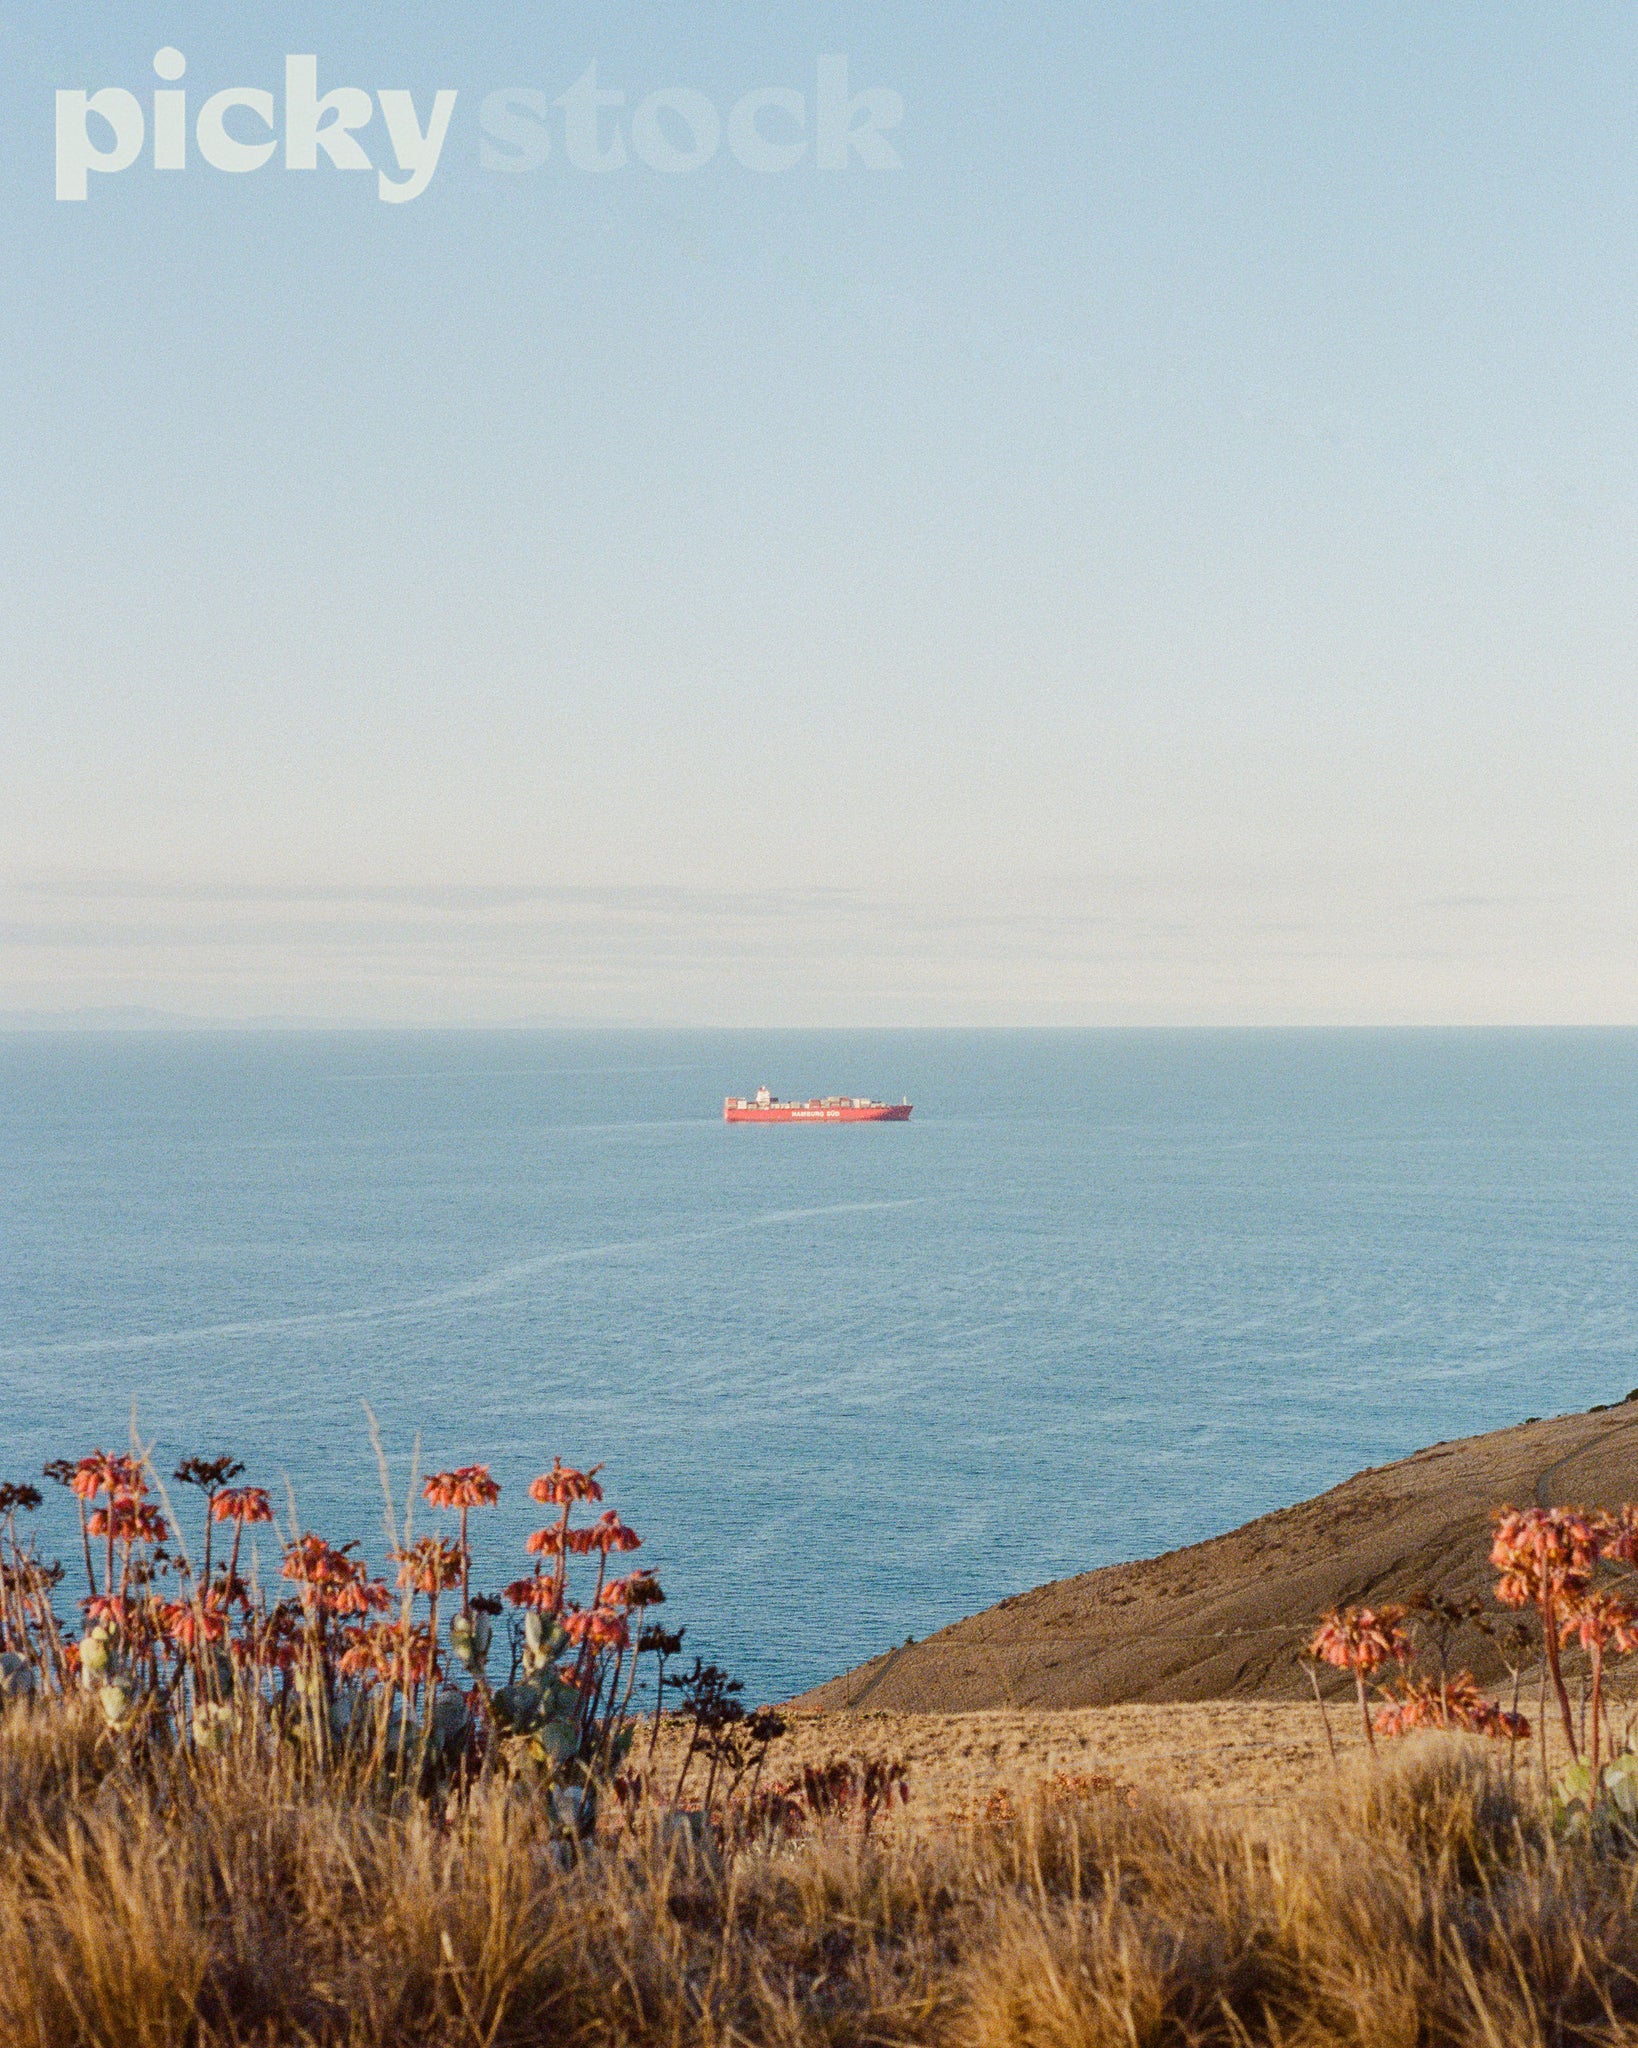 Image of a red container ship at sea. Sky is very blue and bright. Ocean is very blue. Photo taken from a cliff covered in dry brown grass with red flowers in the foreground.